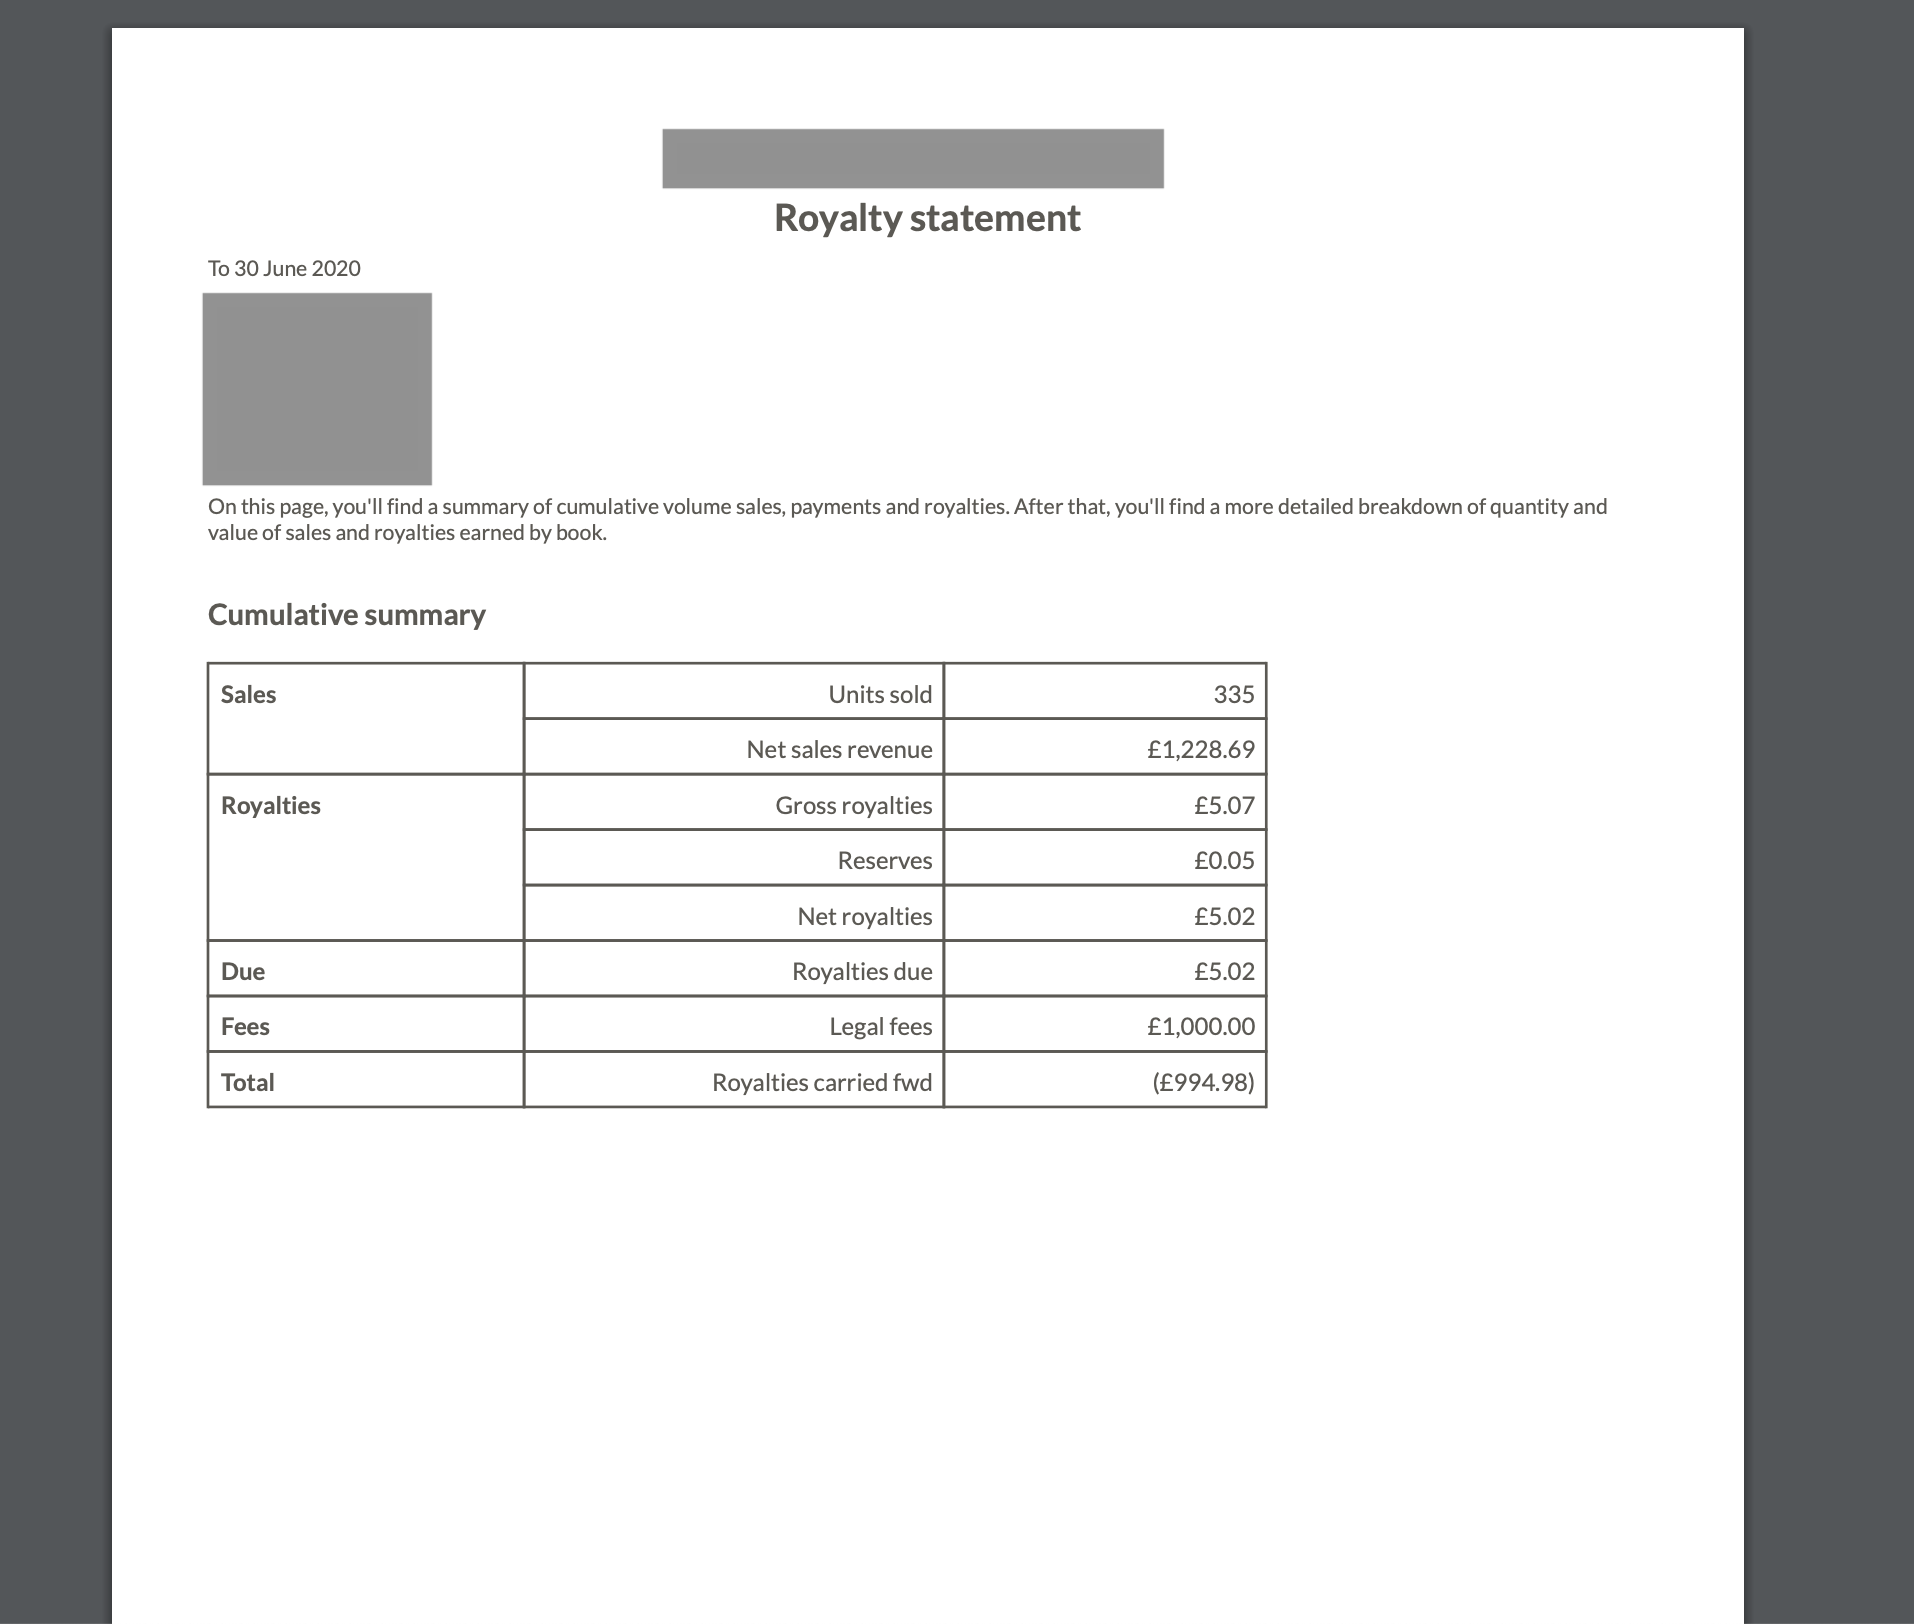 Publishing fee on the royalty statement